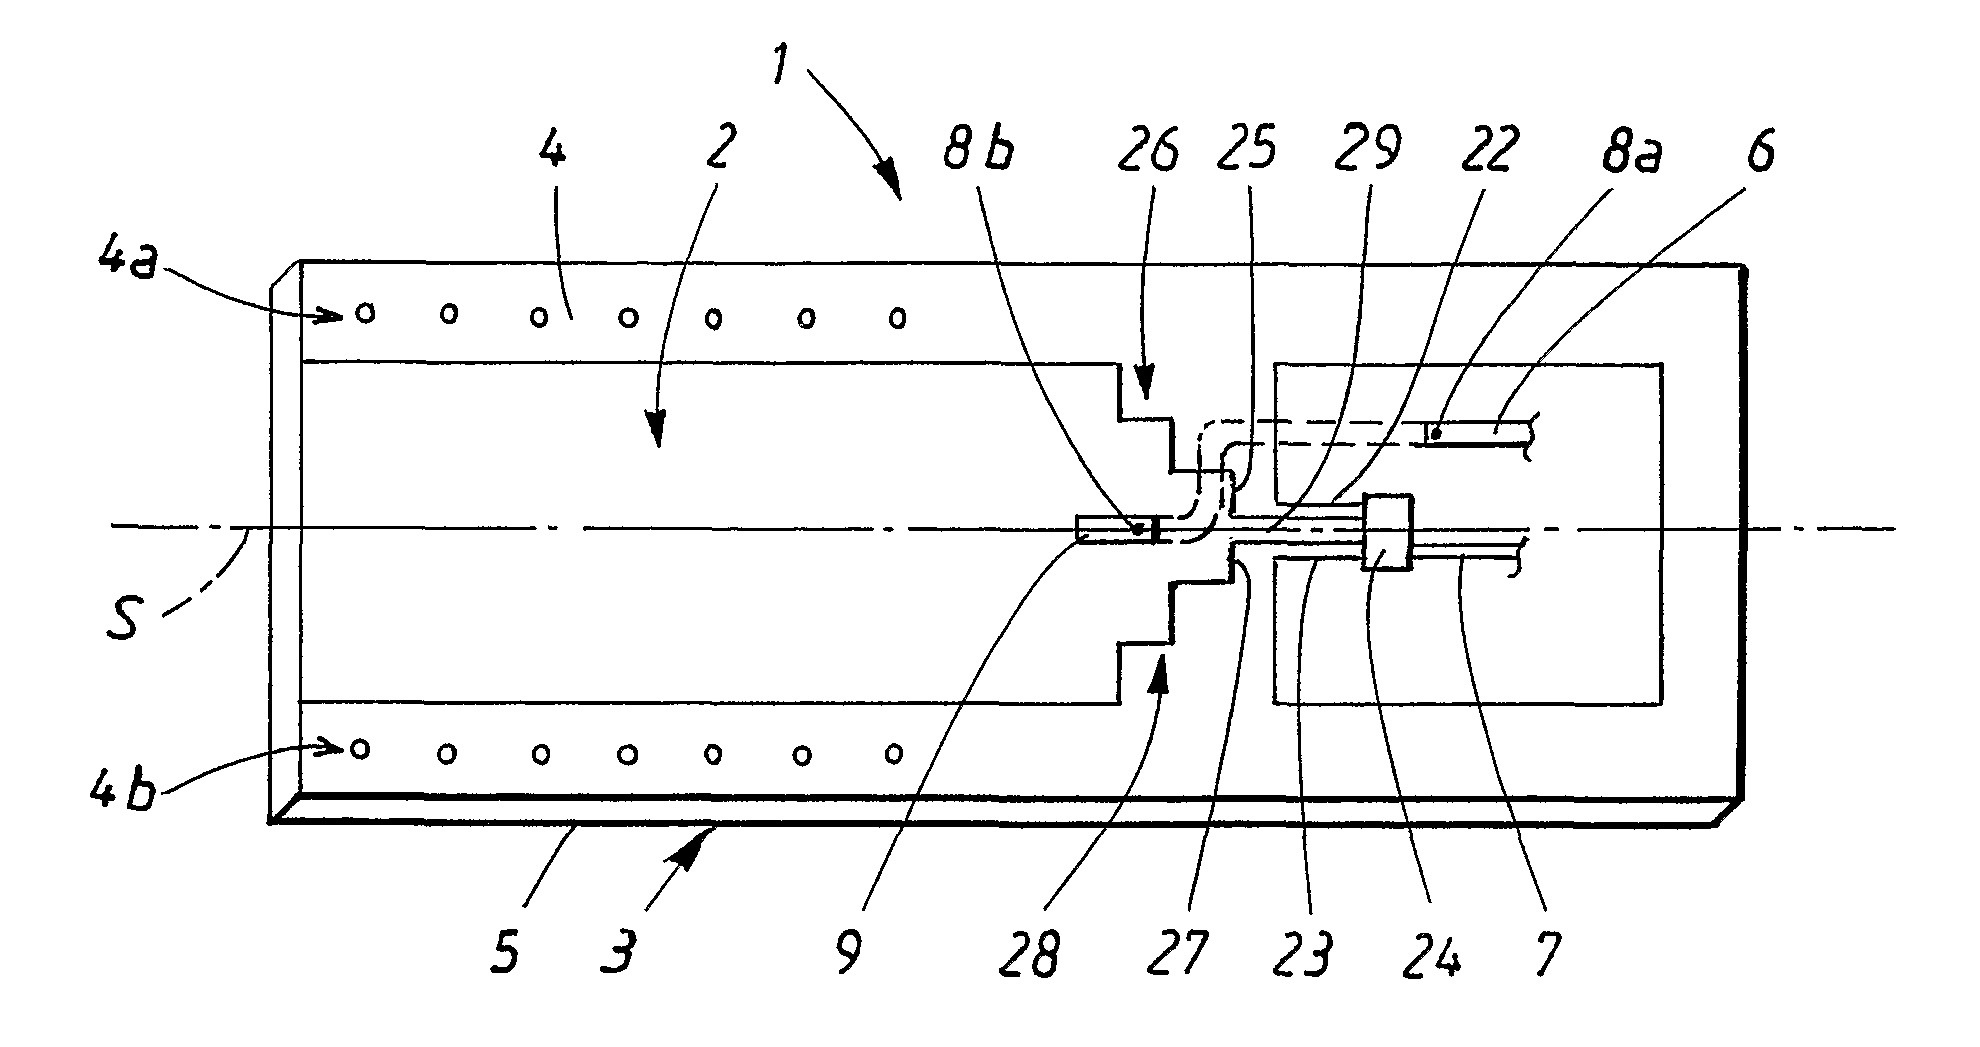 Dual polarized waveguide feed arrangement with symmetrically tapered structures